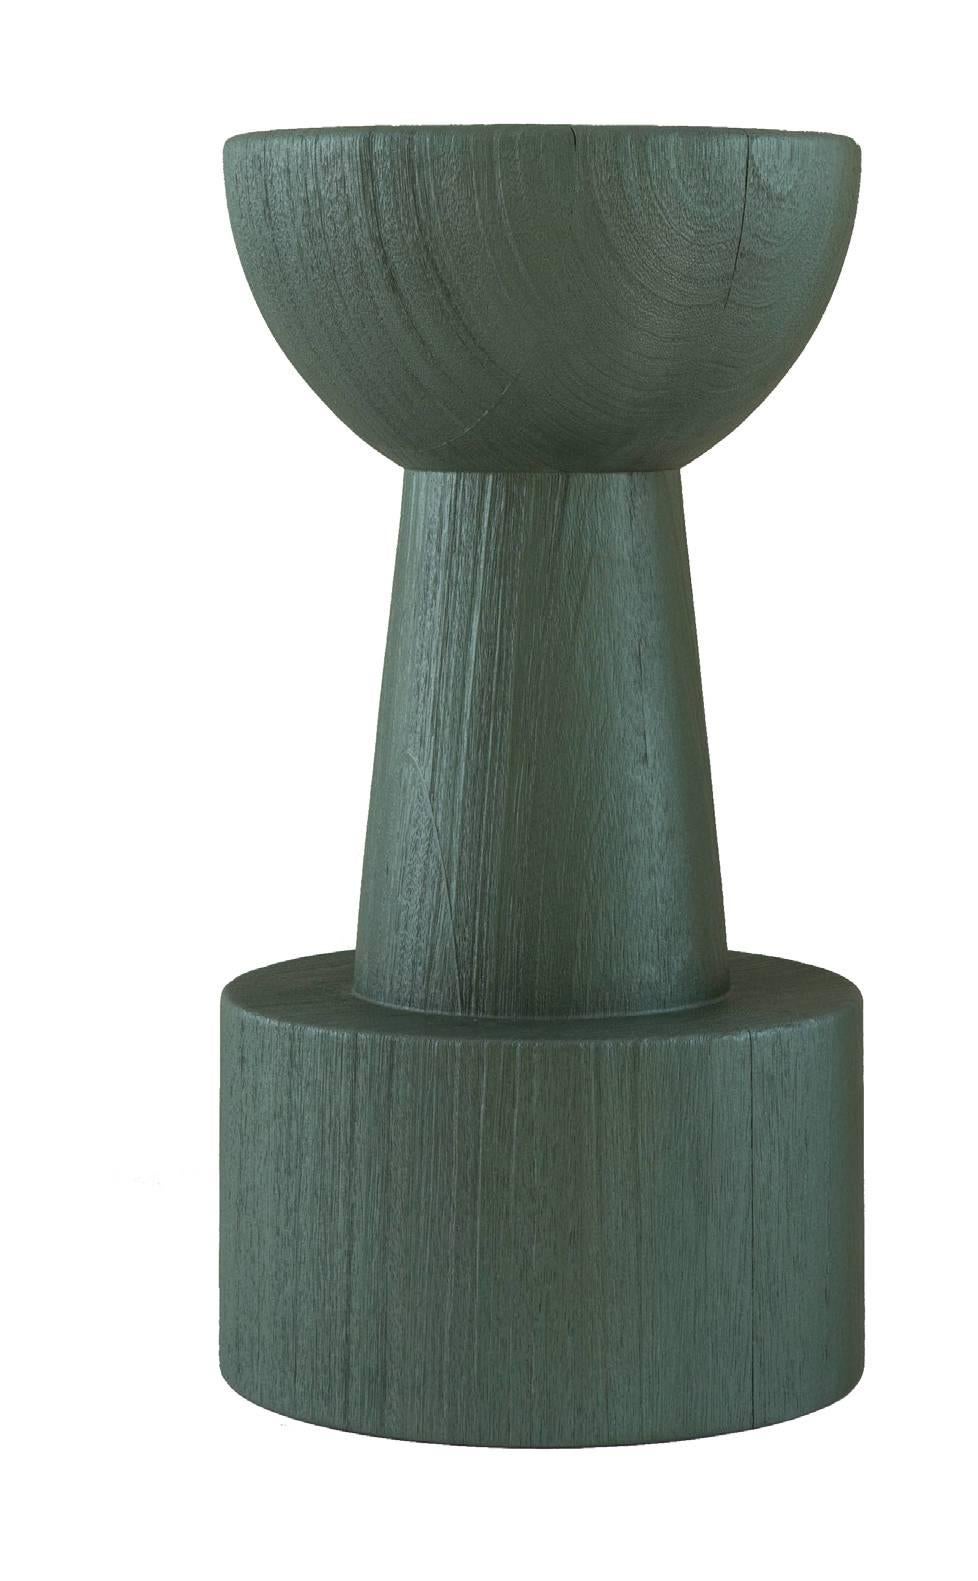 TOTEM Pearly Green Glaze Solid African Wood Island / Bar Stools im Zustand „Neu“ im Angebot in NEW YORK, NY